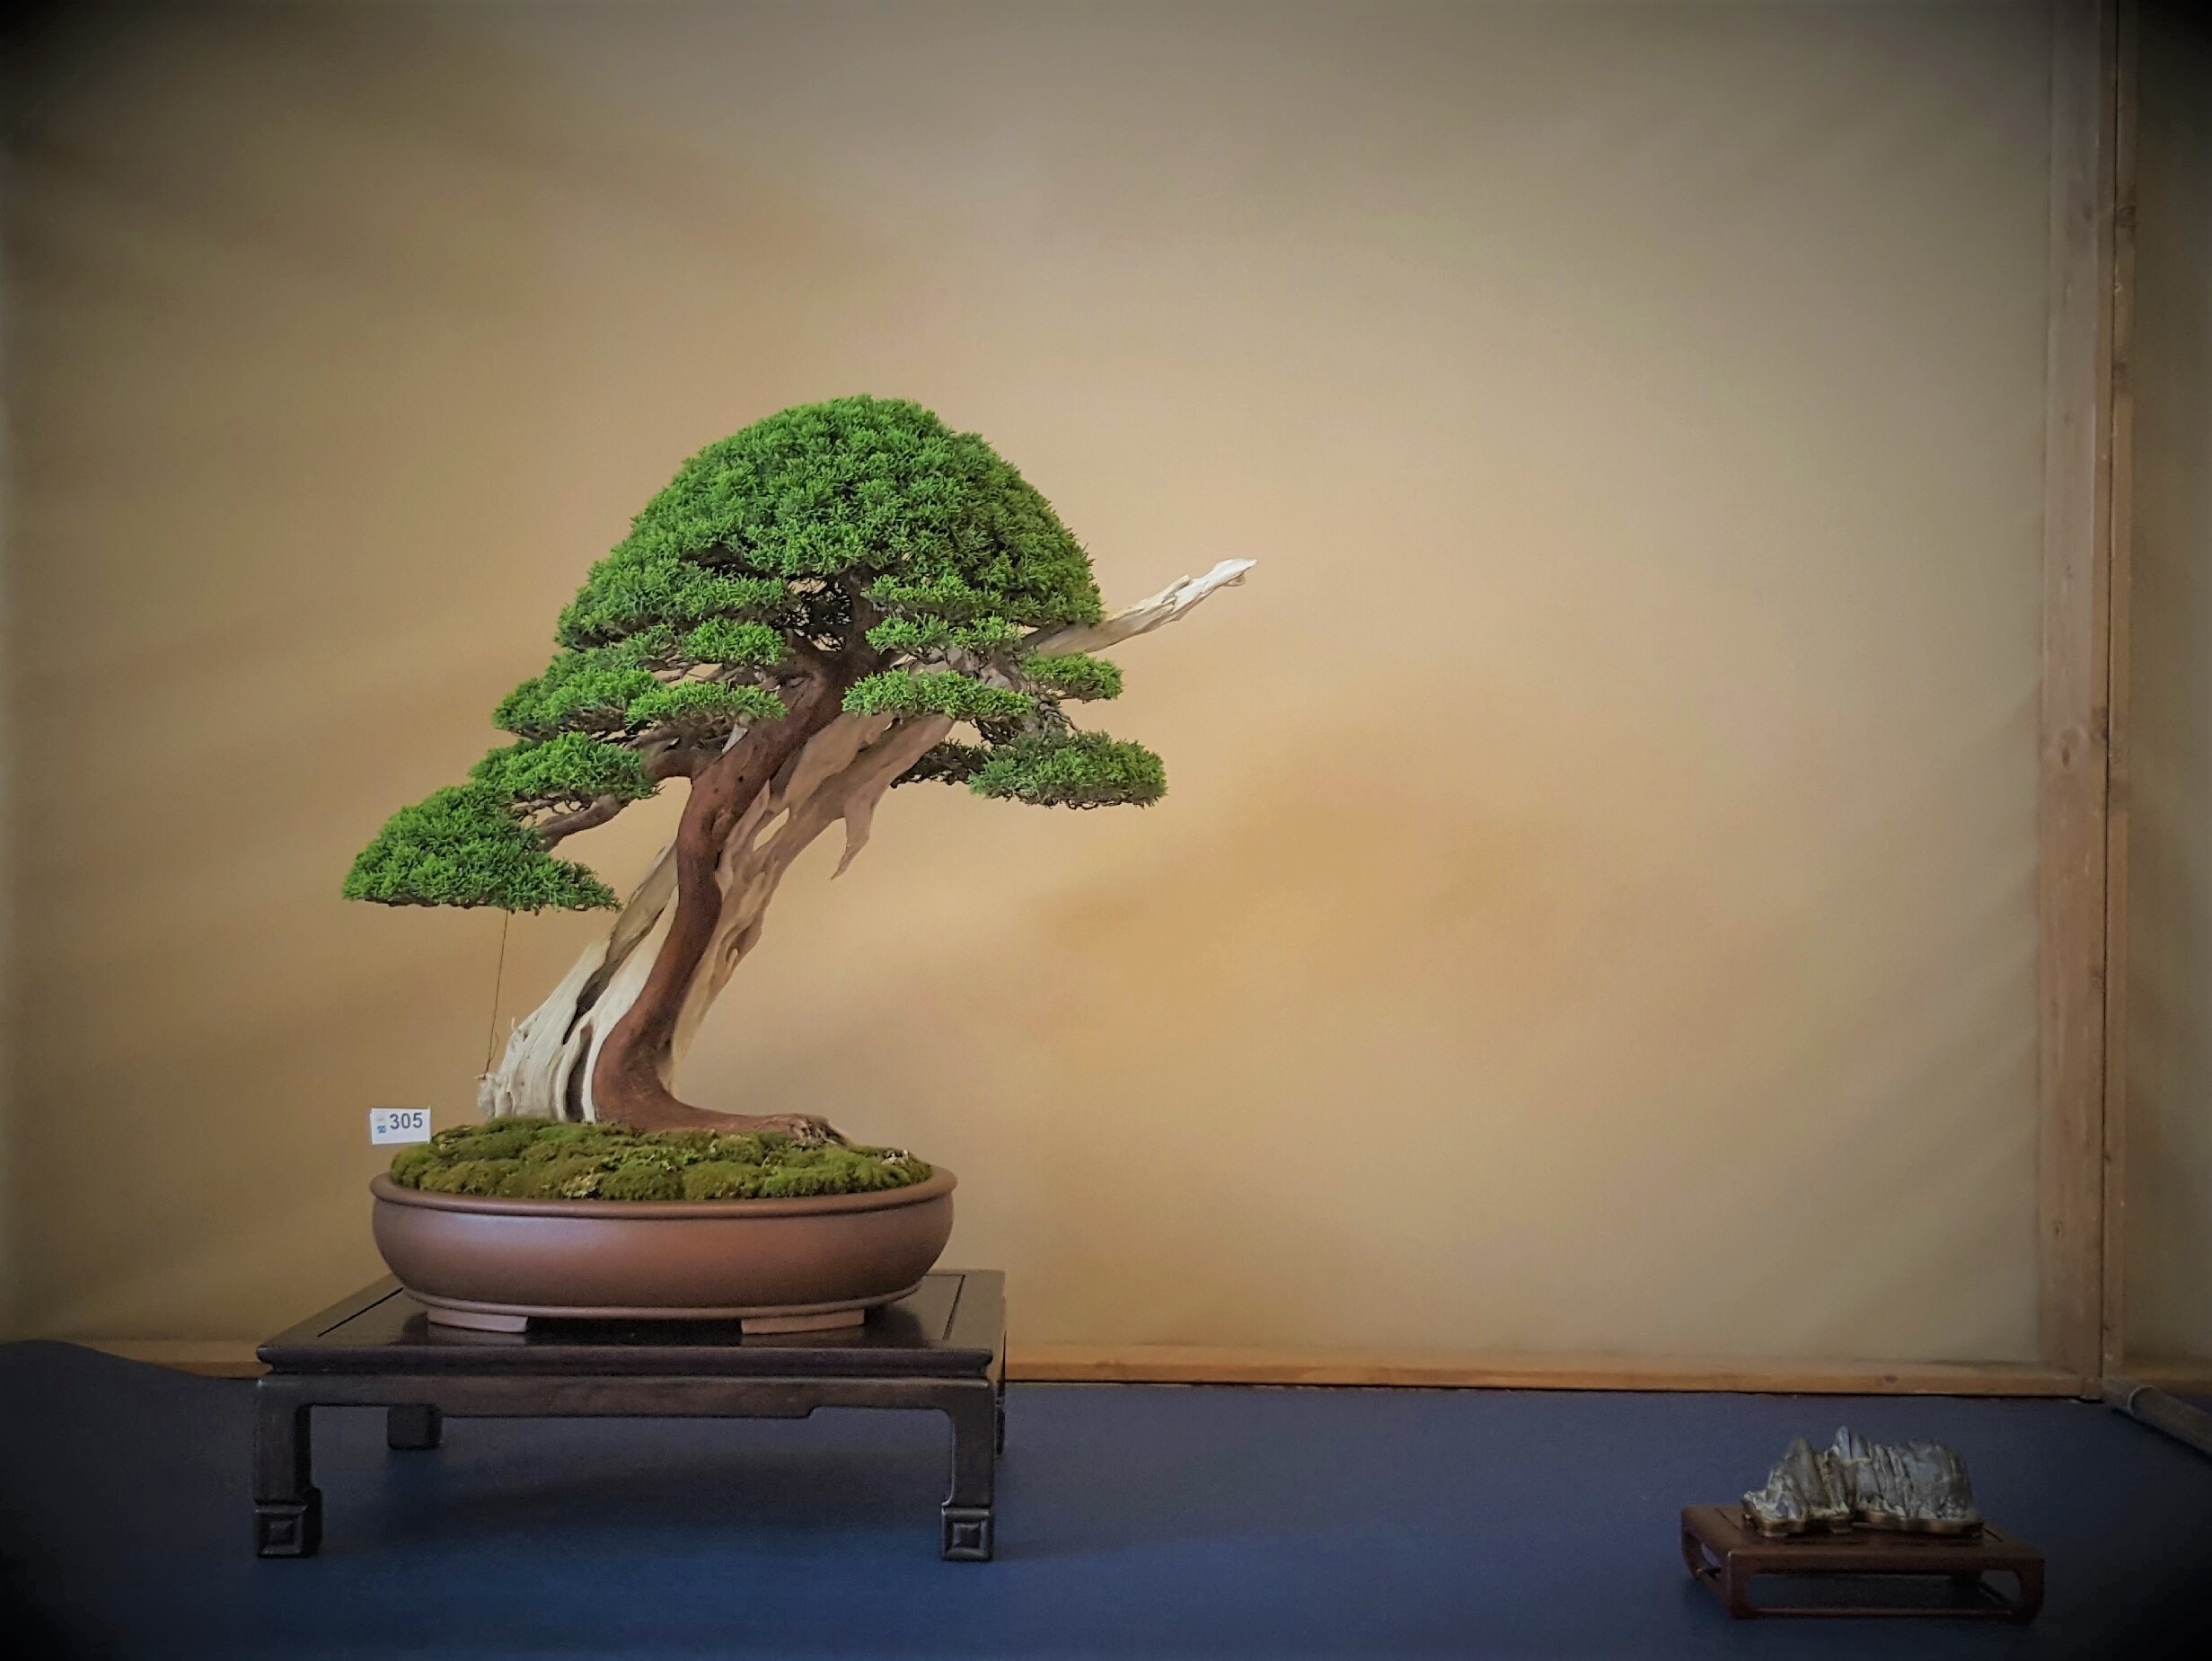 Everything you need for bonsai growing and caring